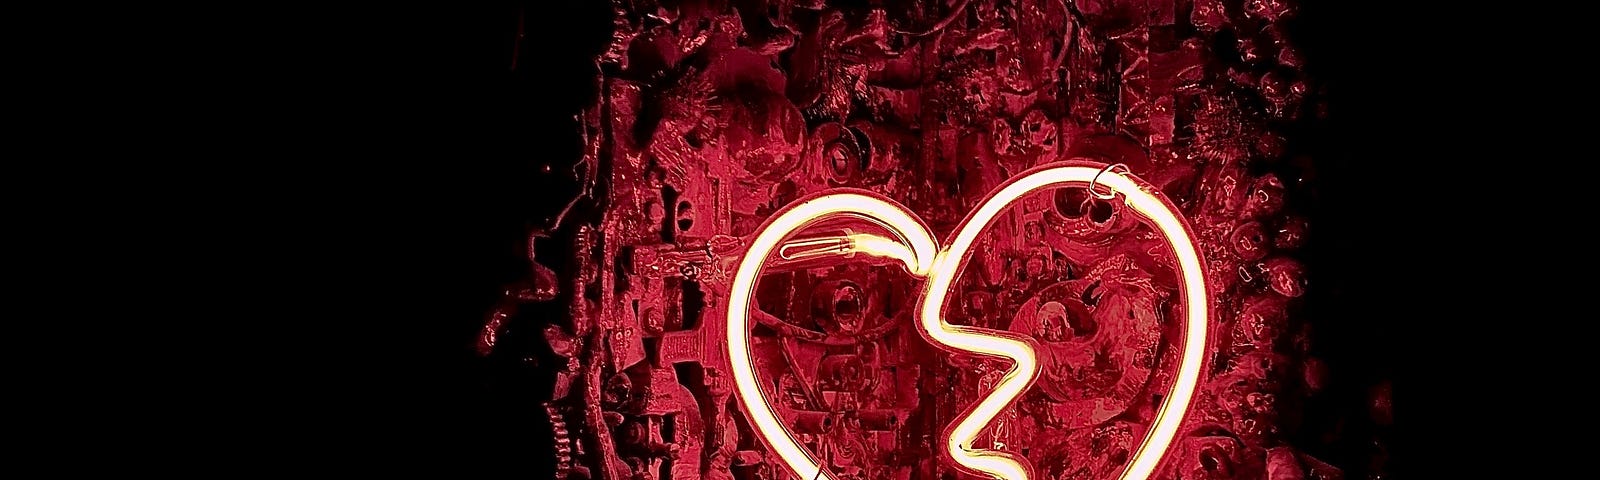 A red neon image of a heart with a crack in the middle.